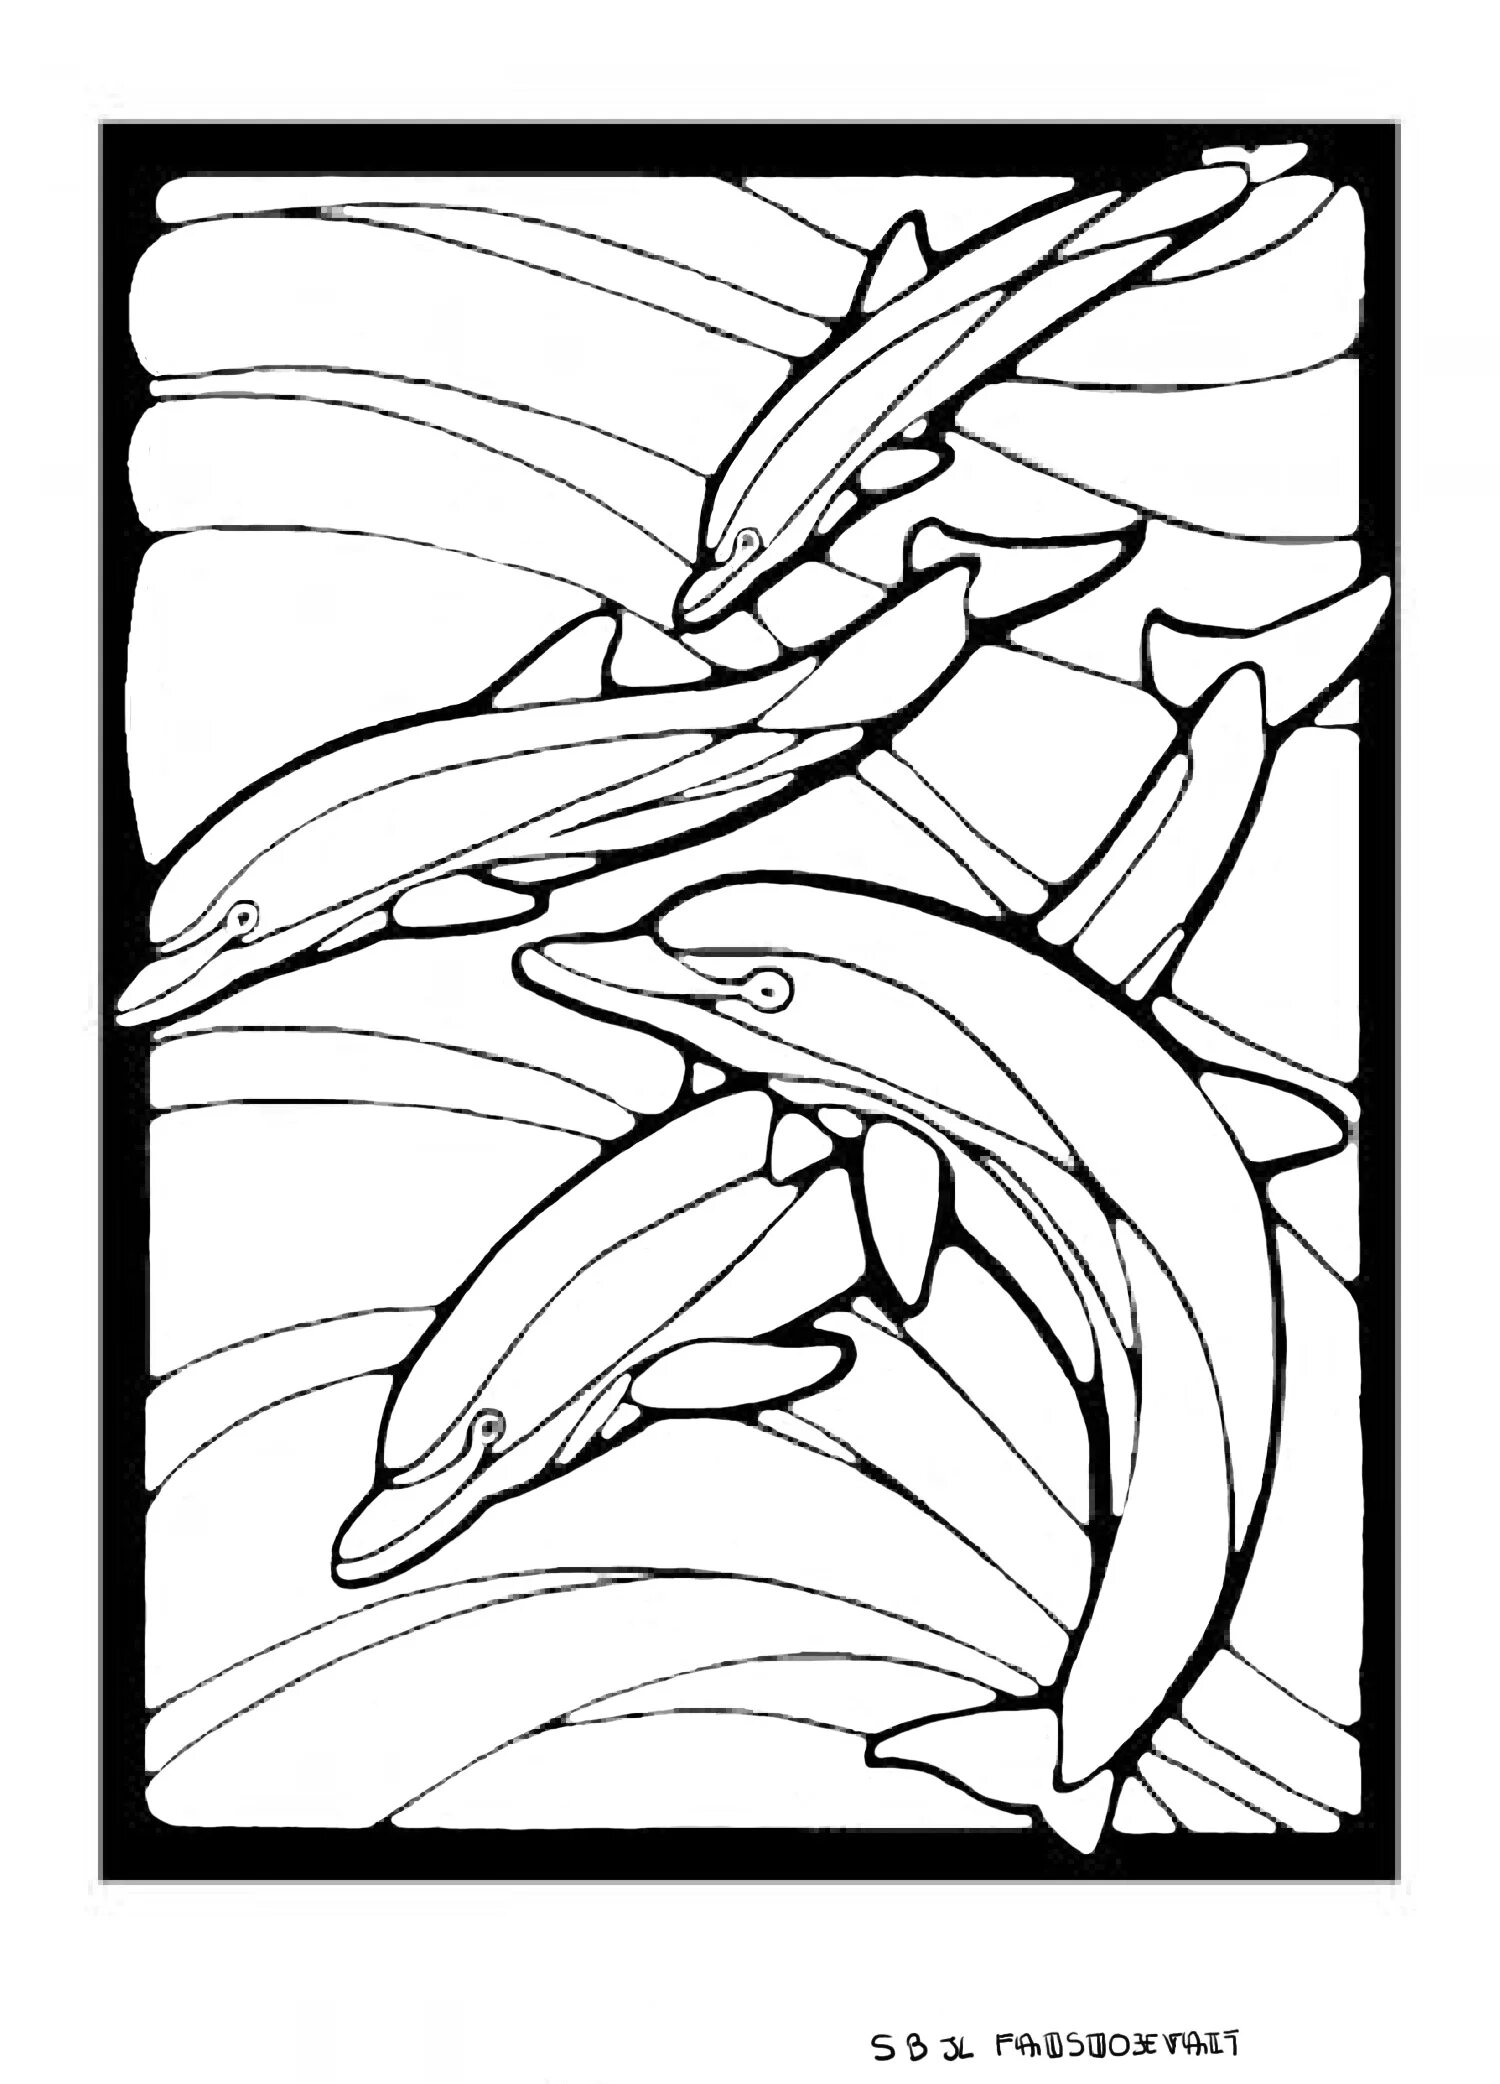 For stained glass #2